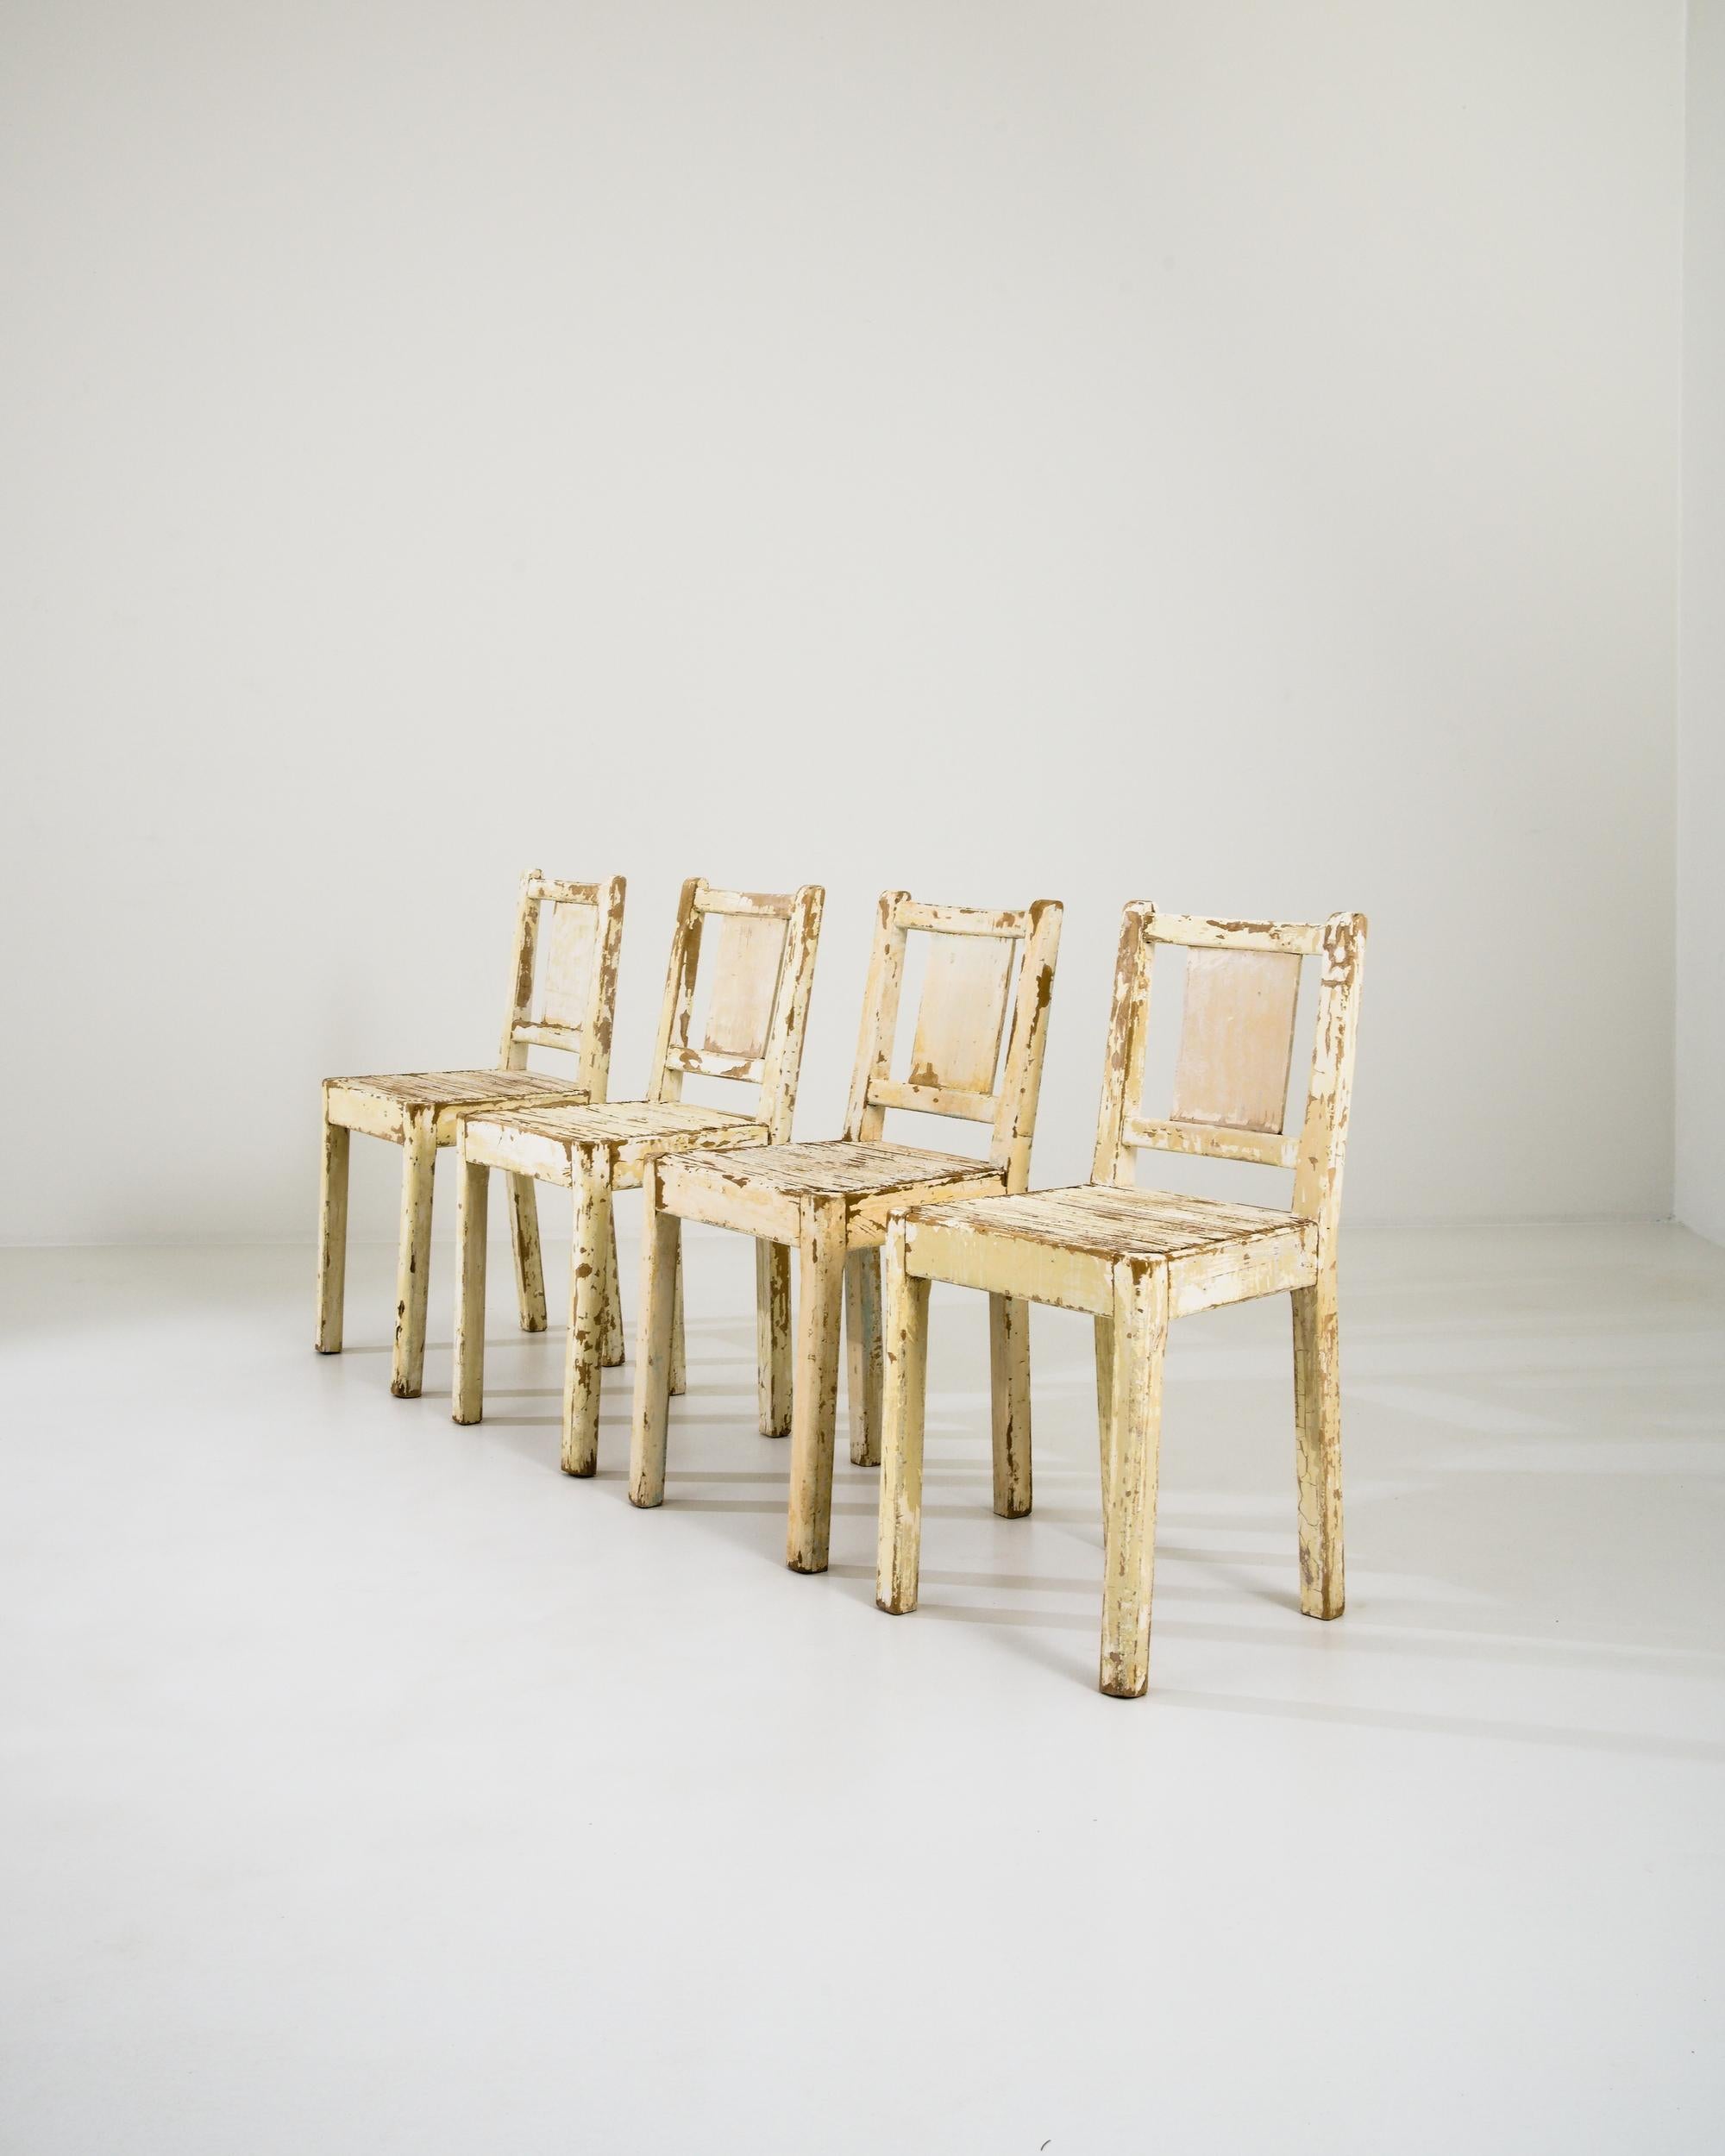 A set of wooden dining chairs from Europe circa 1960. Exuding a bright and sunny disposition, these chairs show off an array of yellows, beiges, and browns that have been collaged together on their surfaces over their long history and experience. As